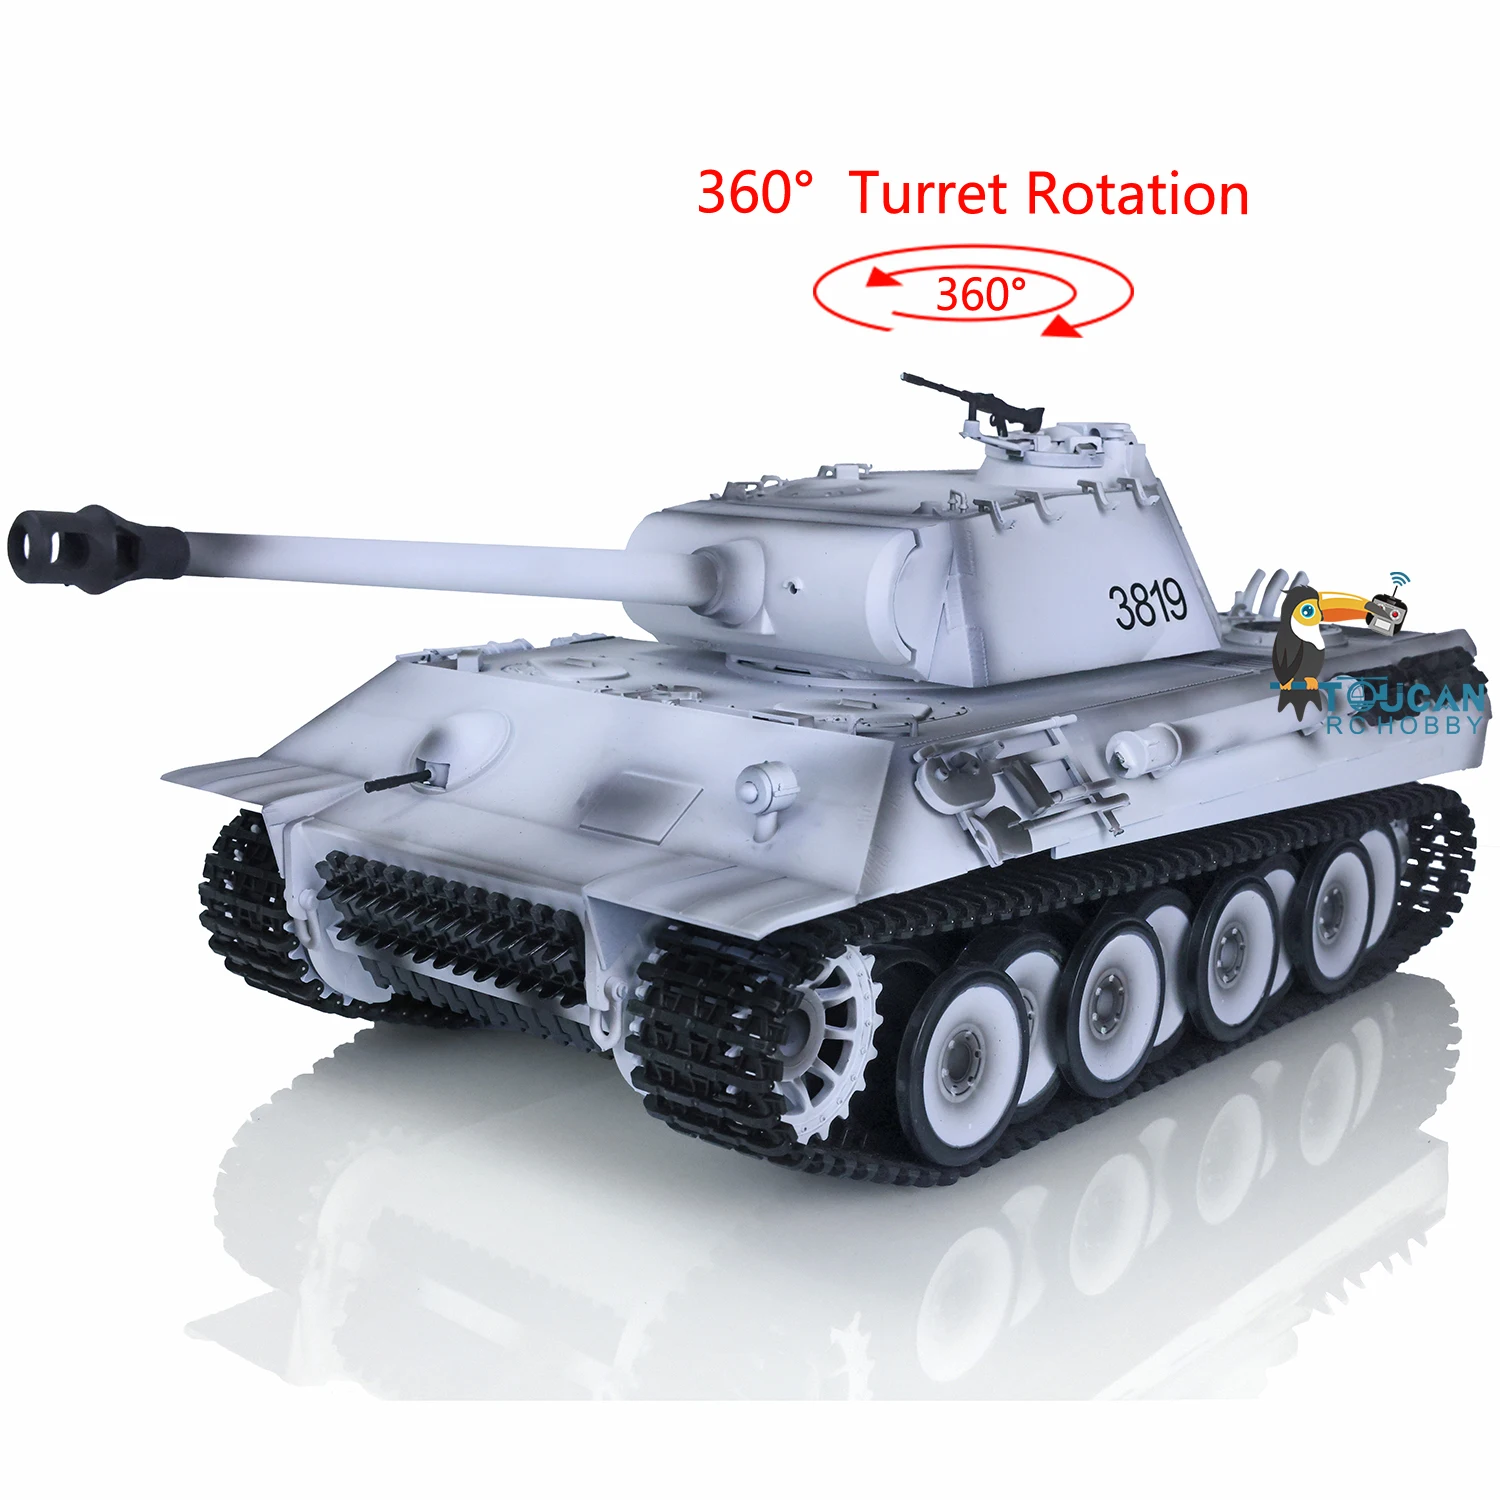 

Gifts Heng Long 1/16 Snow 7.0 Plastic German Panther V RTR RC Tank 3819 W/ 360° Turret Wheels Smoke Engine Toucan Model TH17294